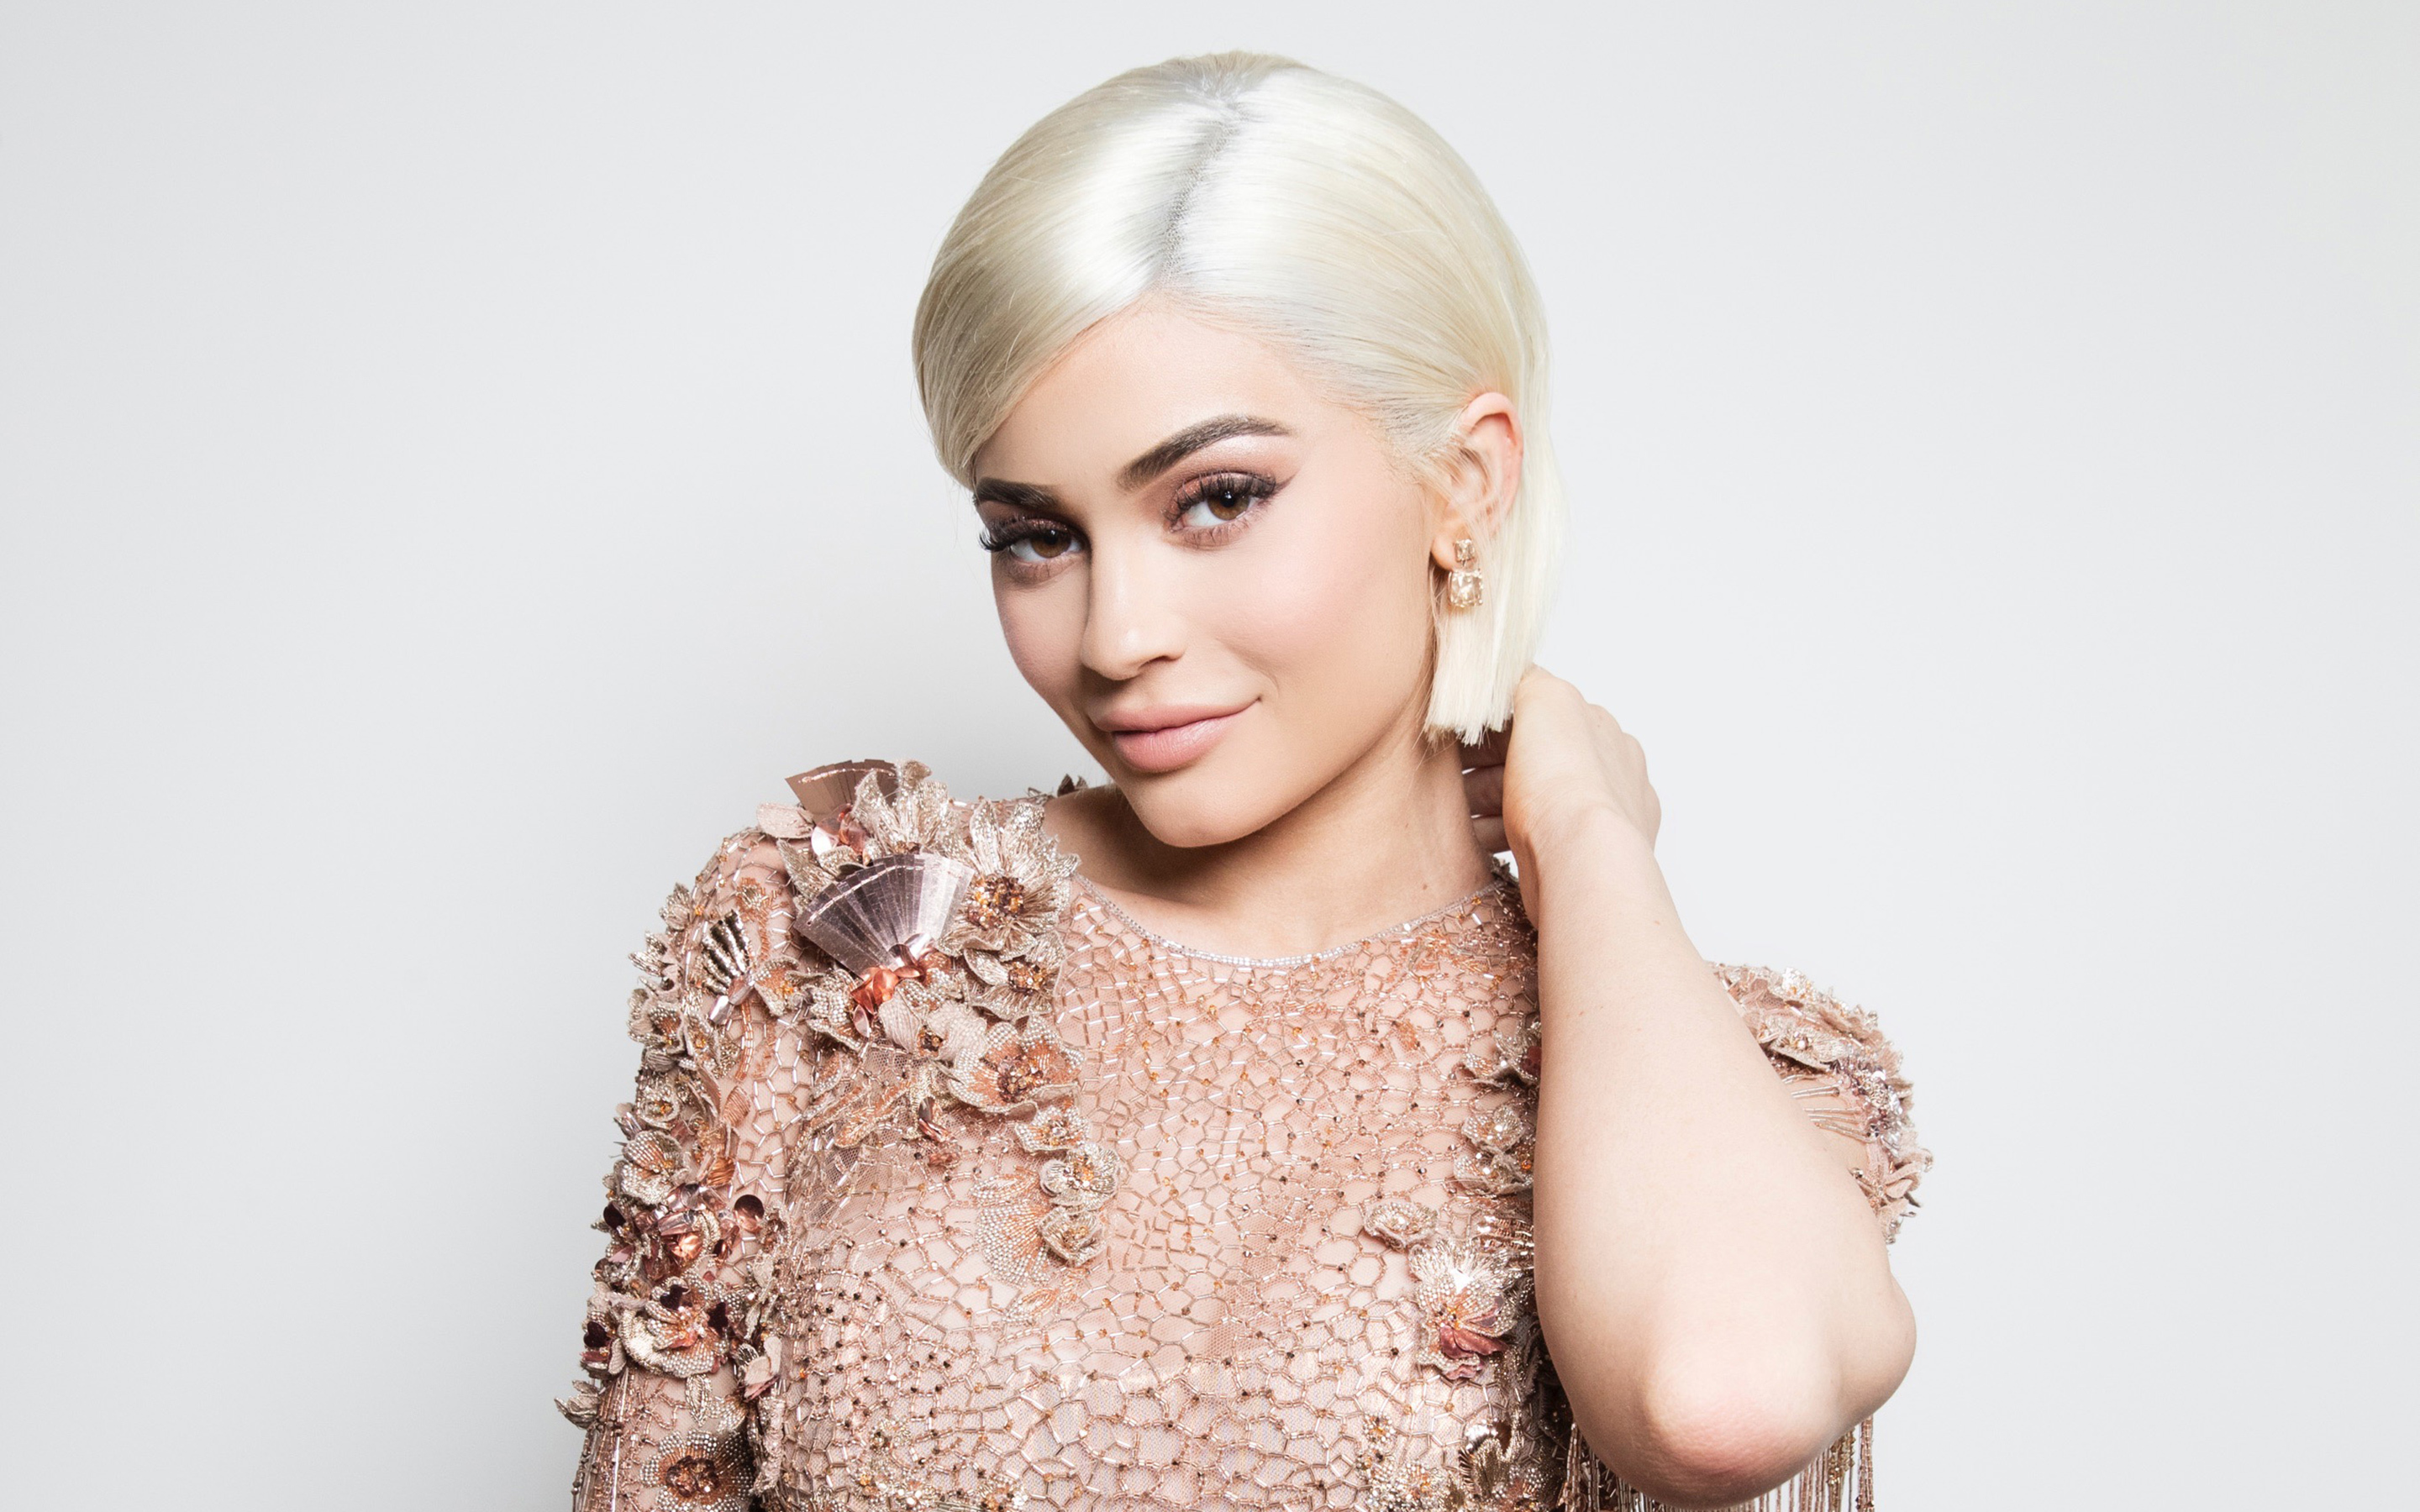 Blonde Kylie Jenner 2018 Wallpaper Hd Celebrities 4k Wallpapers Images Photos And Background